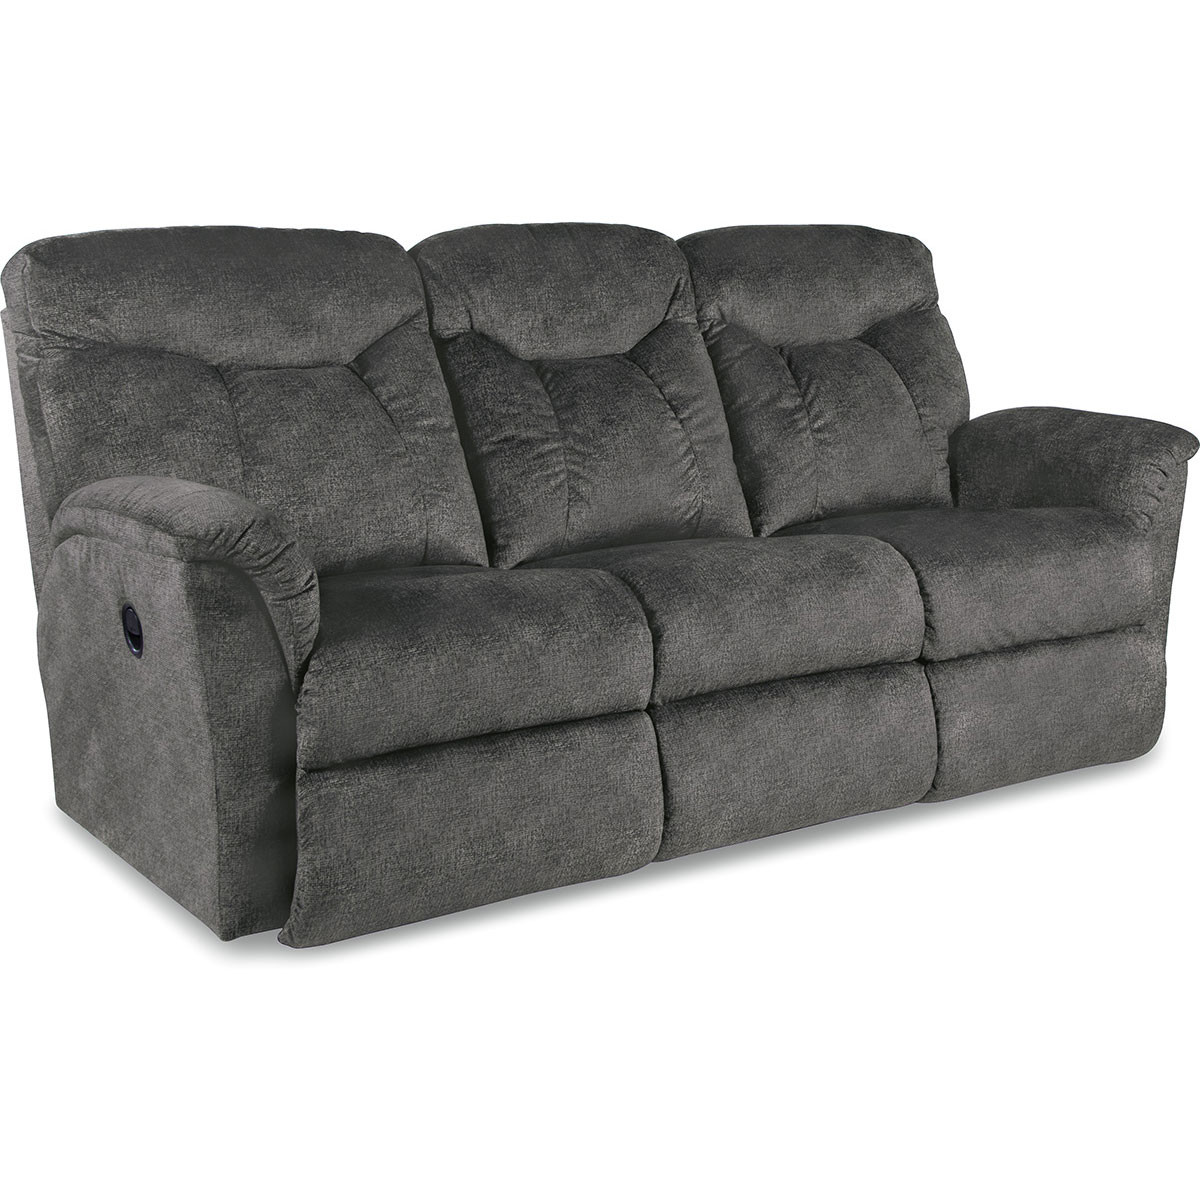 Best ideas about Lazy Boy Recliner Sofa
. Save or Pin Fortune La Z Time Full Reclining Sofa Now.